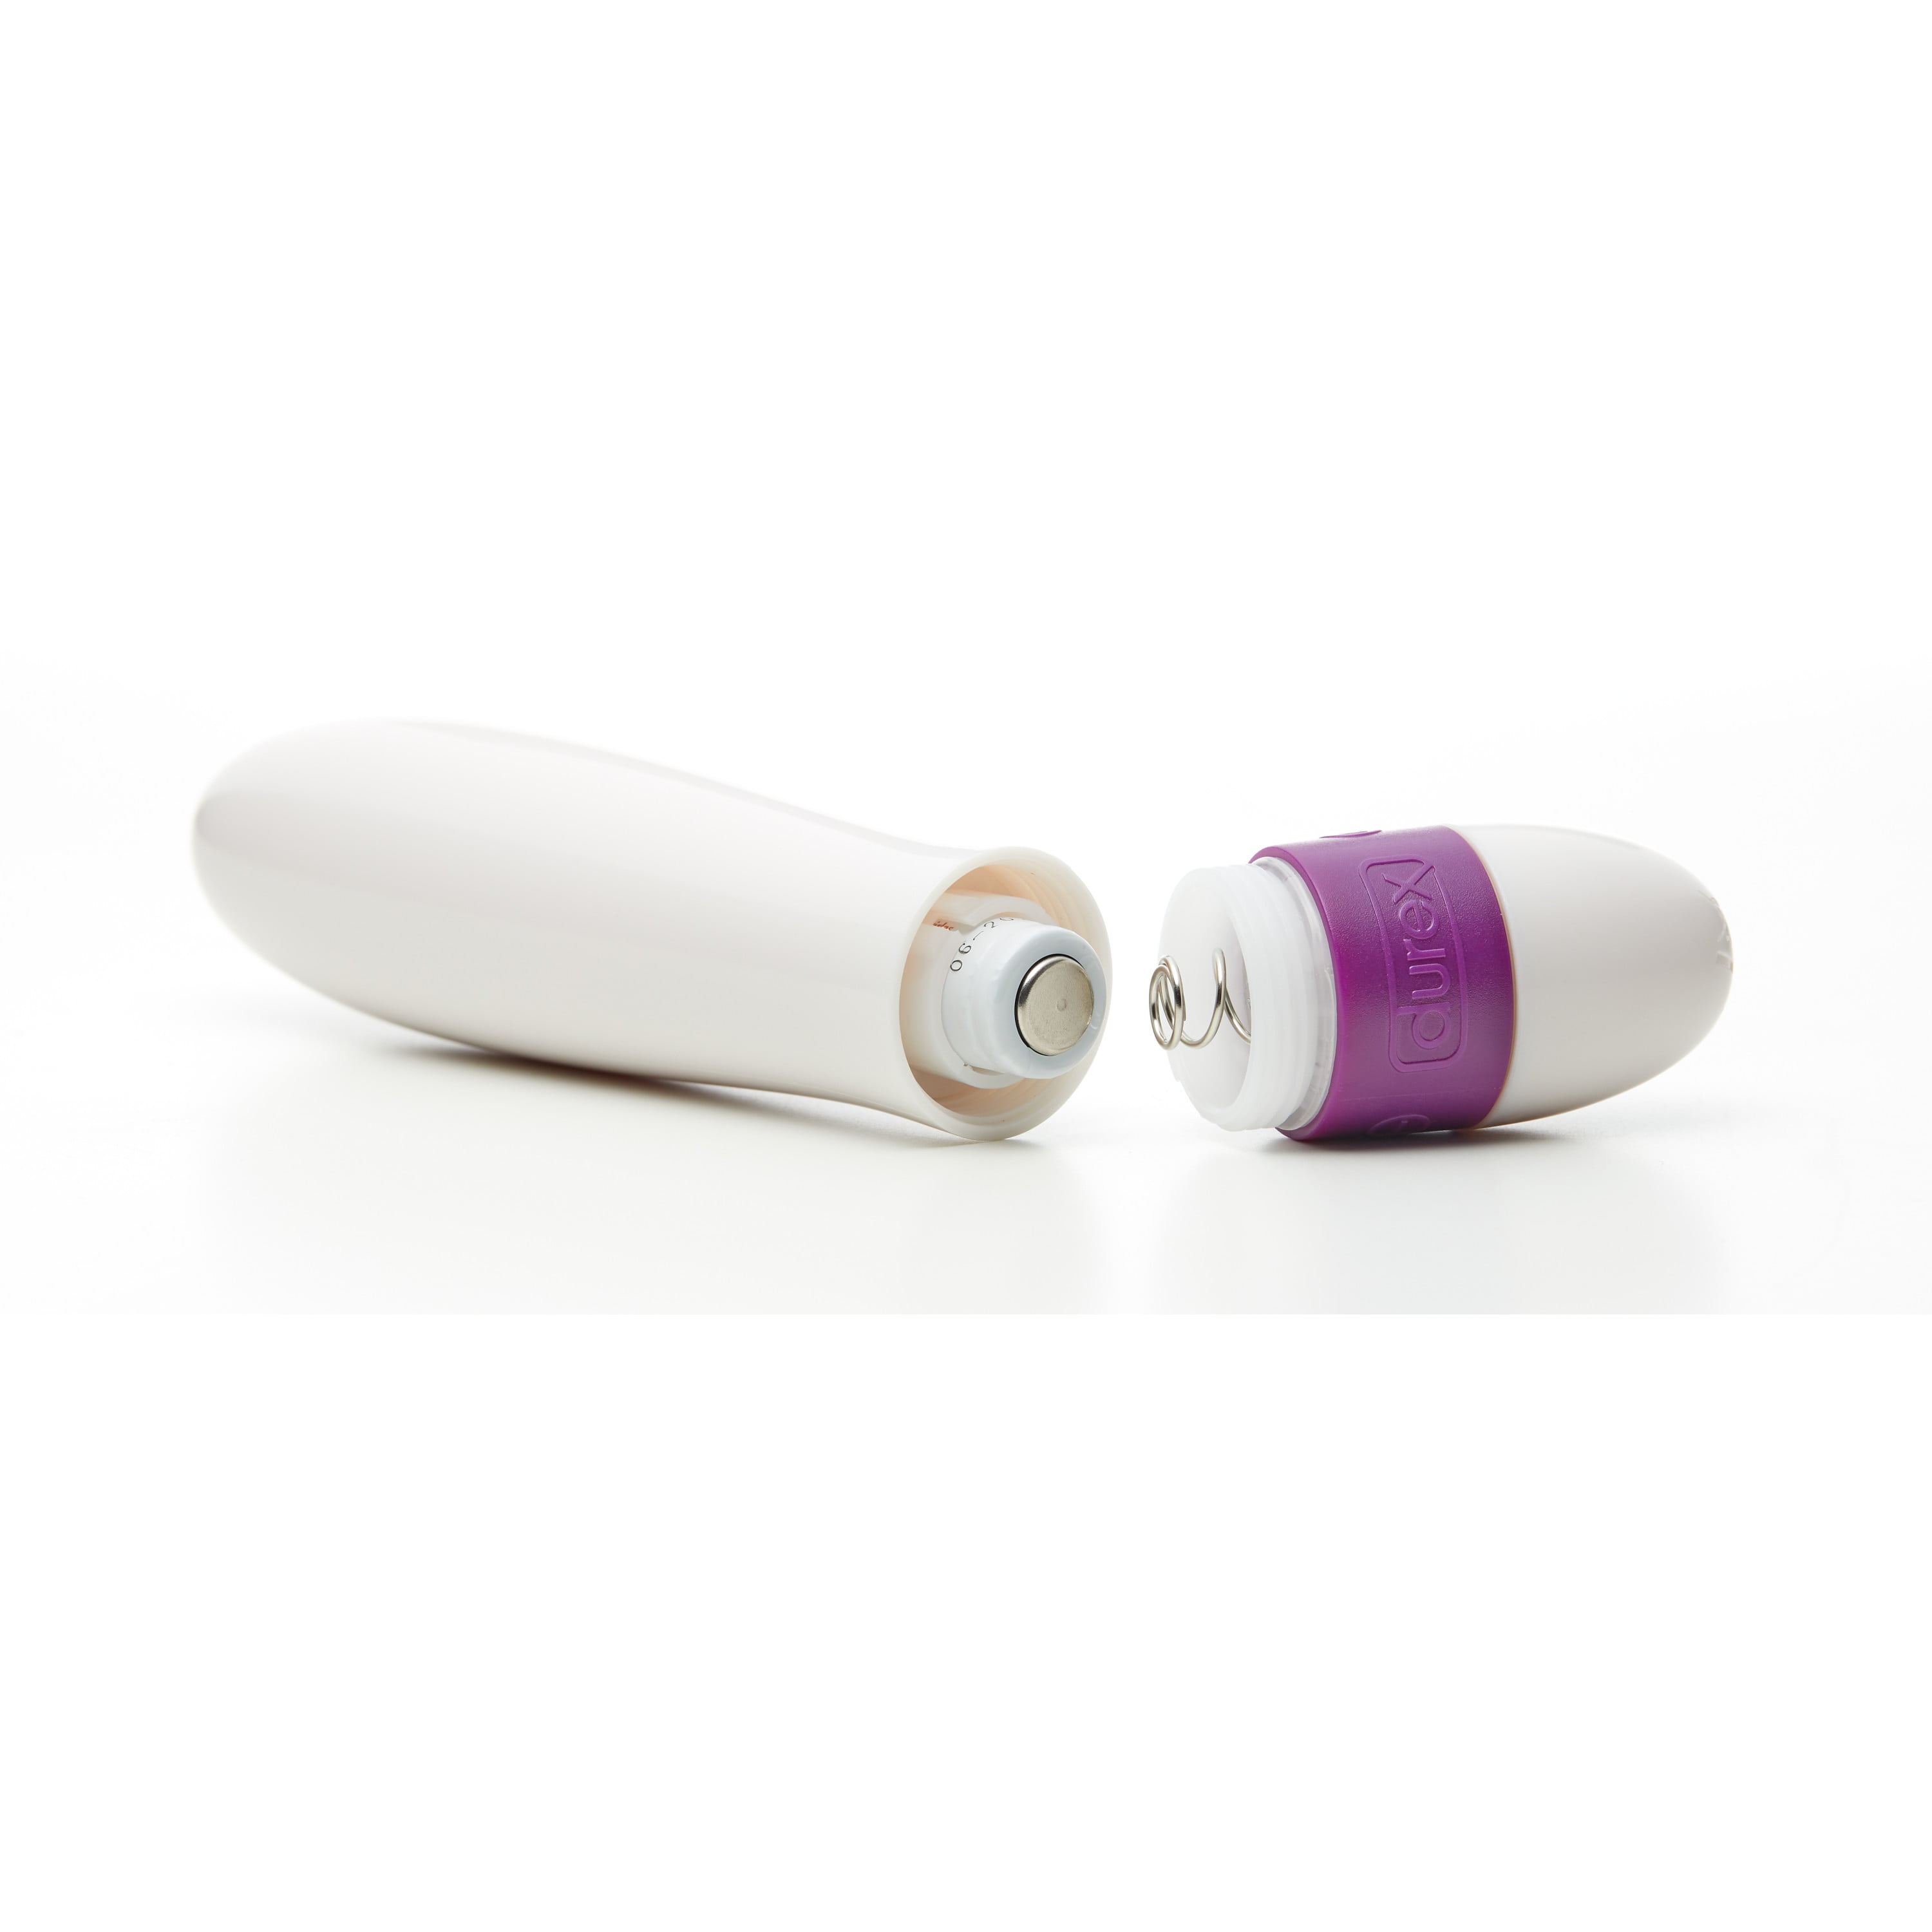 adam butz recommends play allure personal massager pic